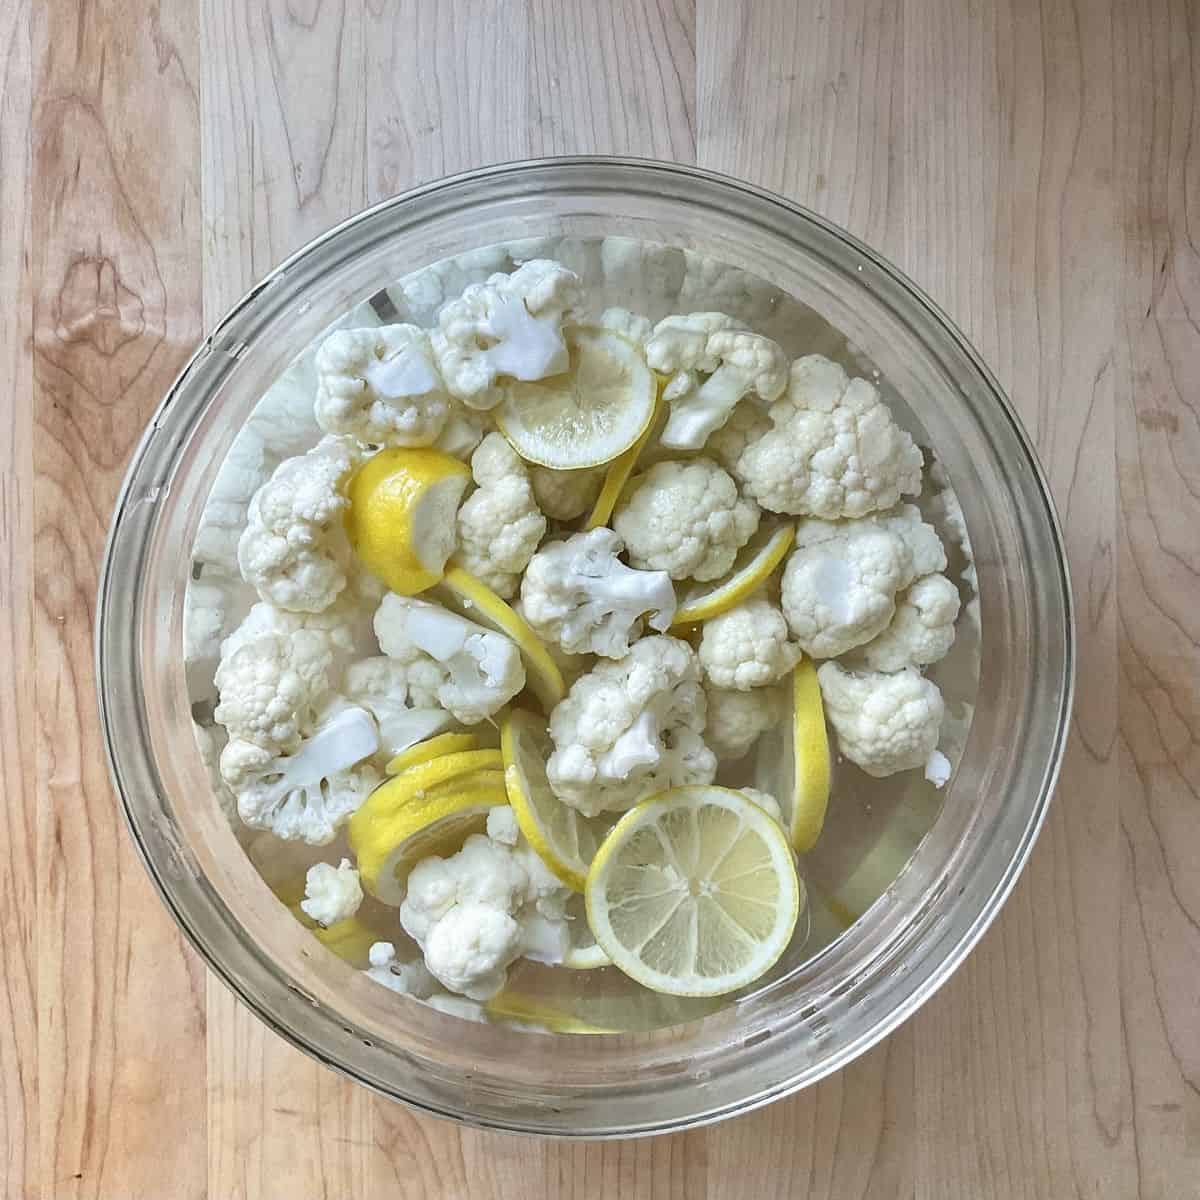 Cauliflower and lemon slices in a bowl.